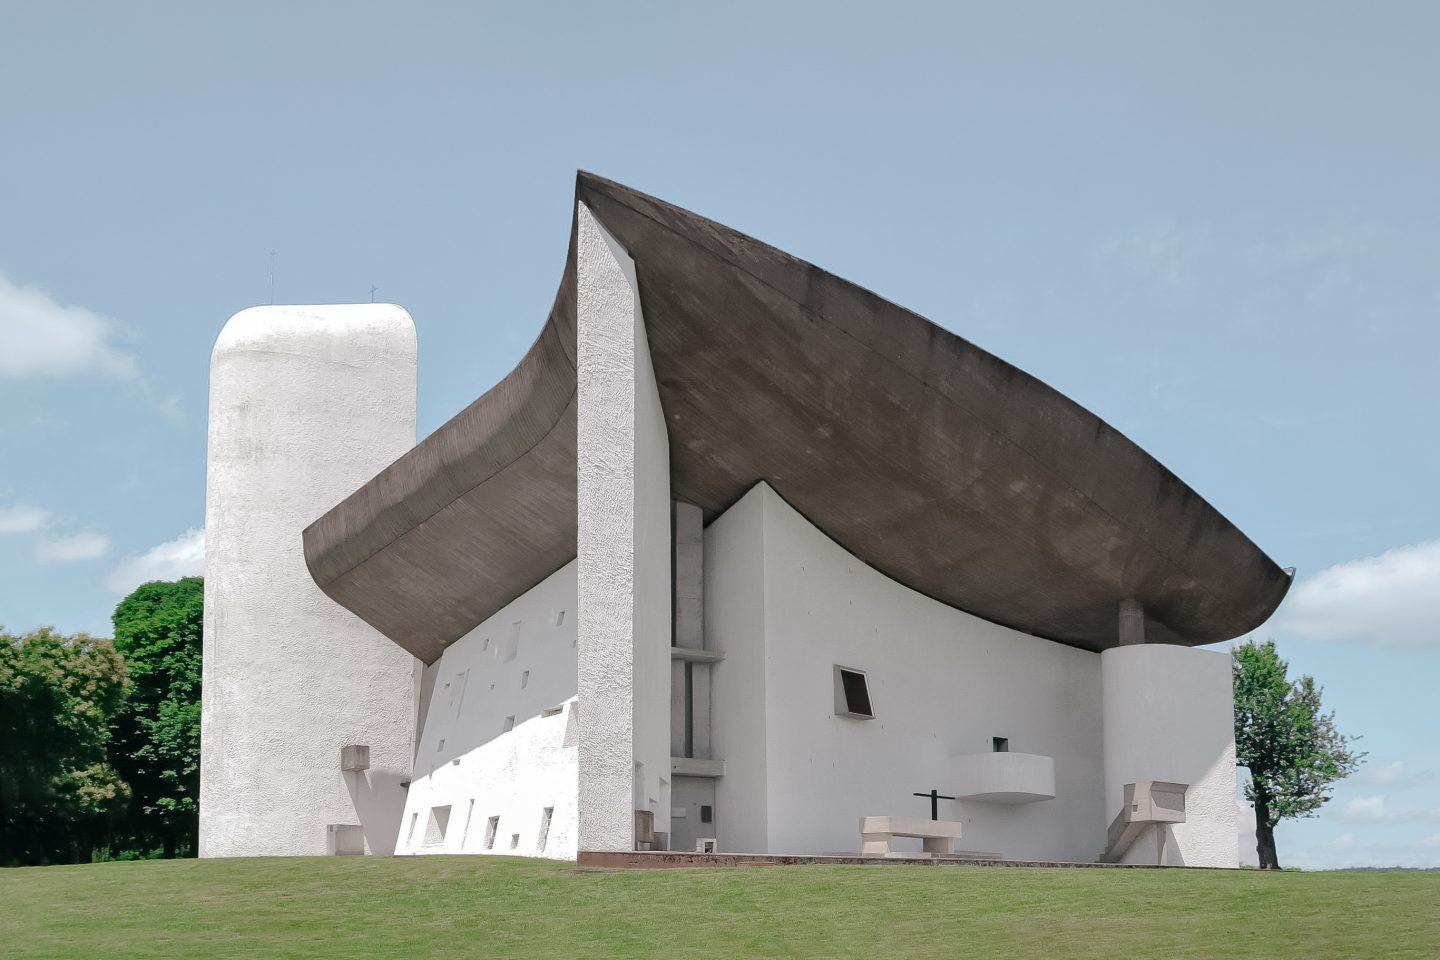 Did Le Corbusier have a positive impact on architecture? - Quora